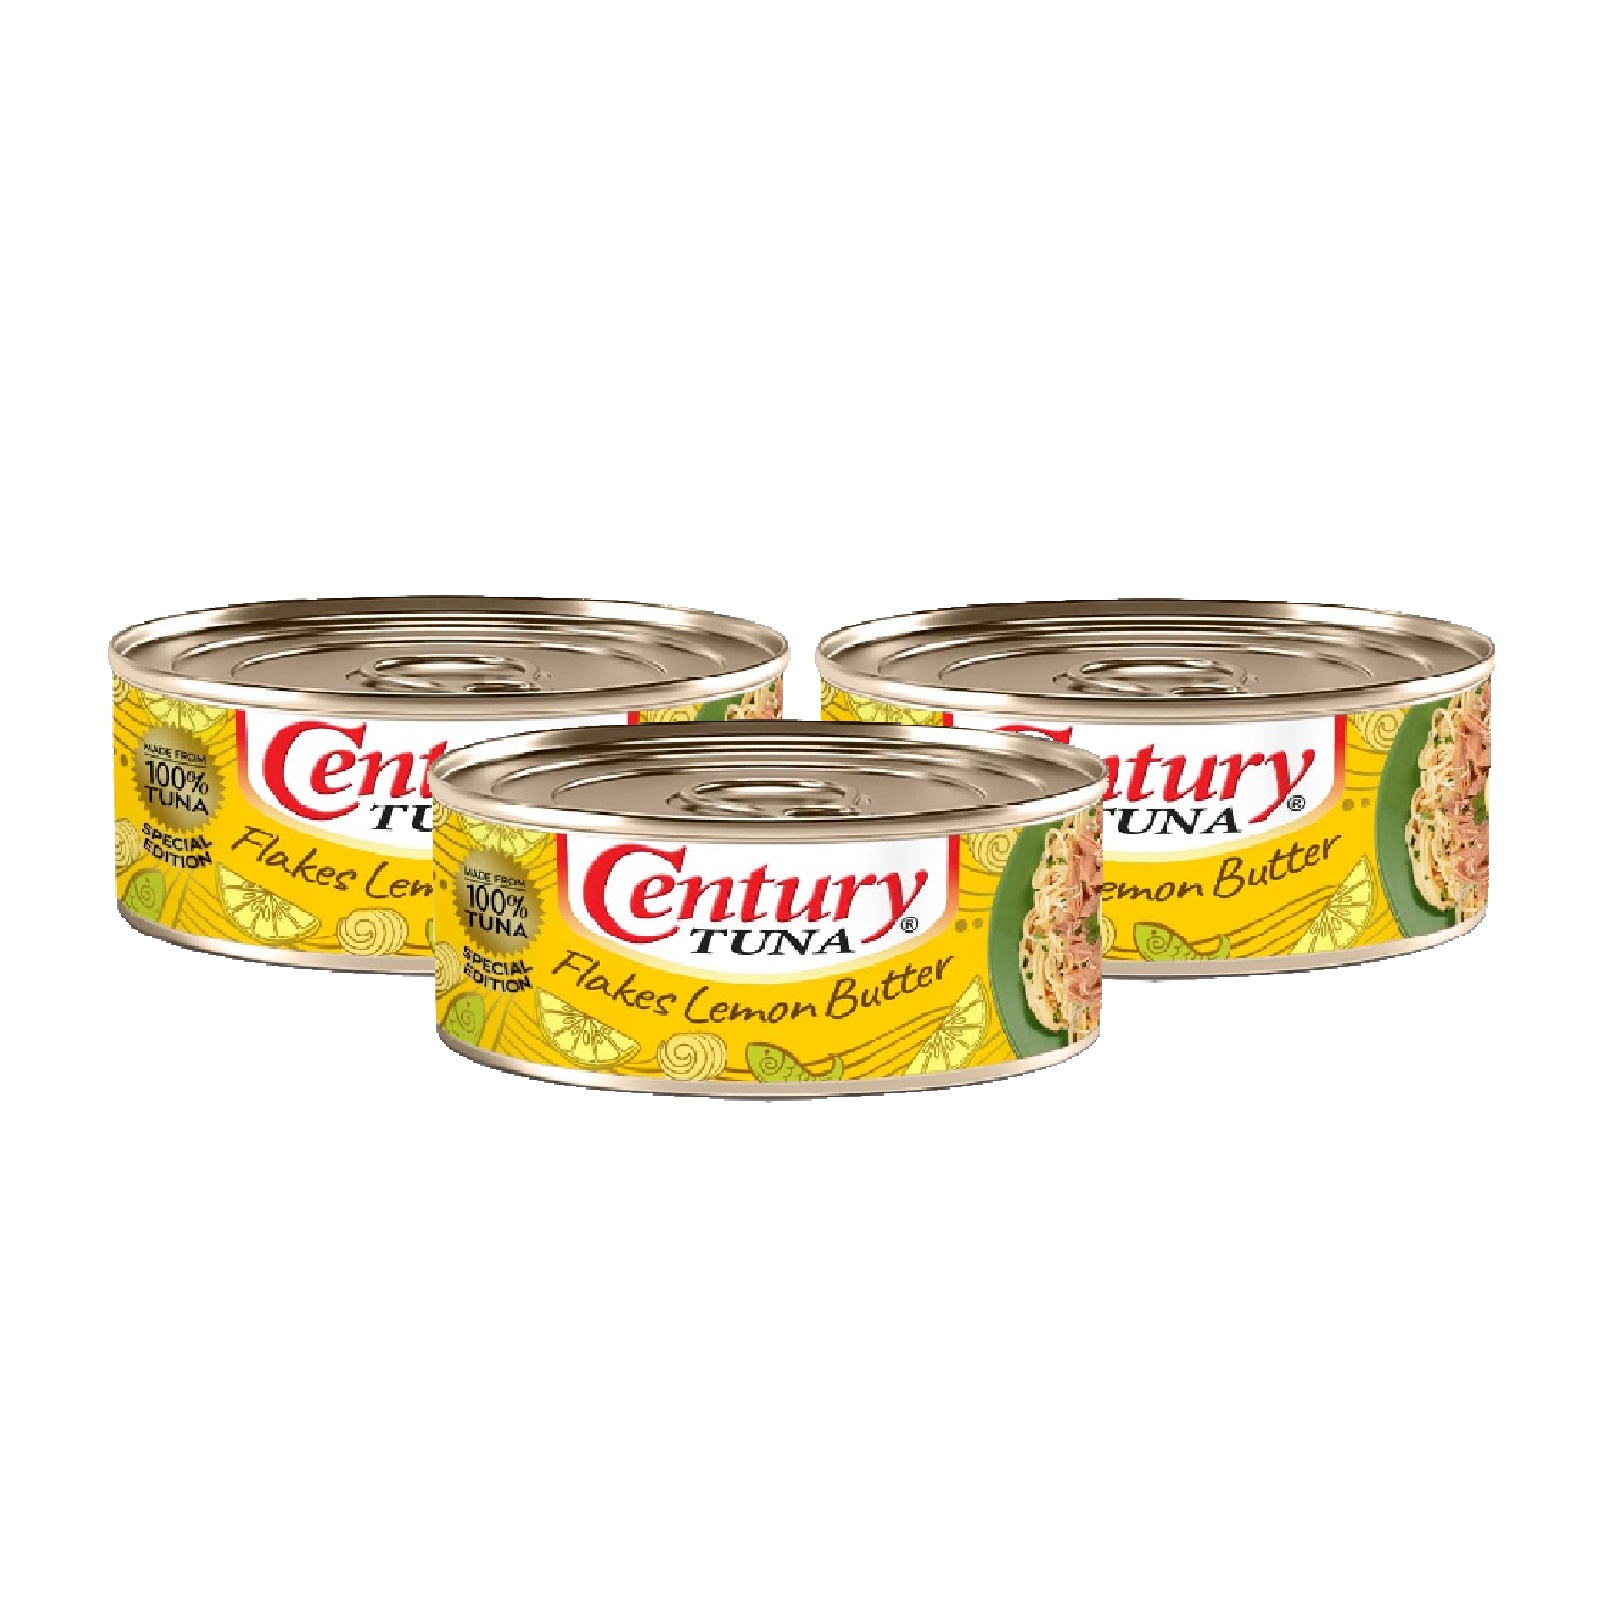 Century Tuna Flakes Lemon Butter 180g - Pack of 3 - Carlo Pacific